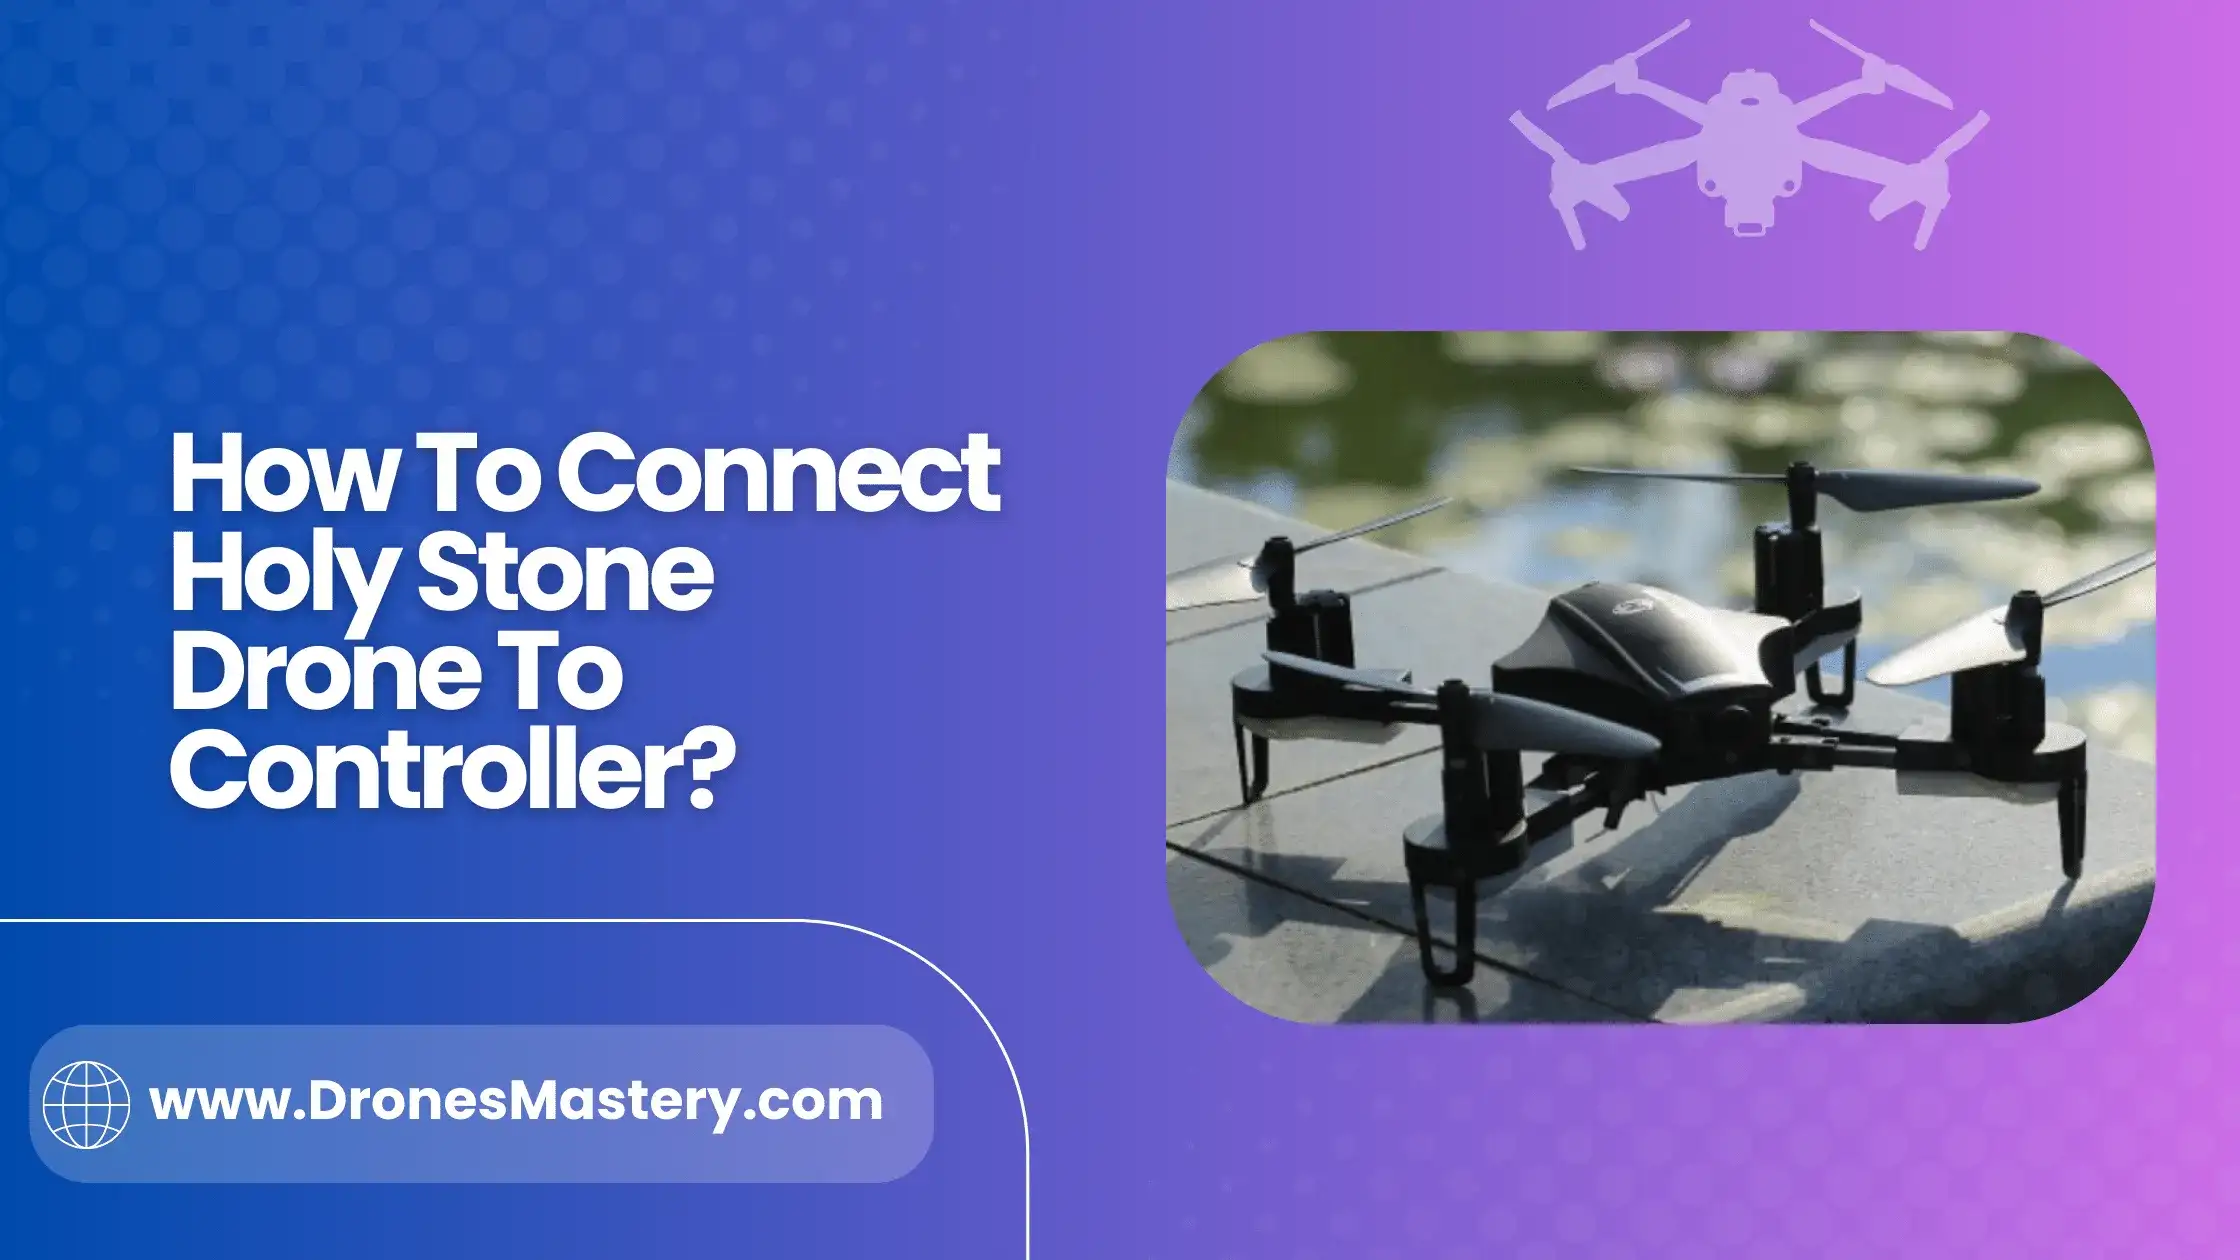 How To Connect Holy Stone Drone To Controller? Easy Solutions